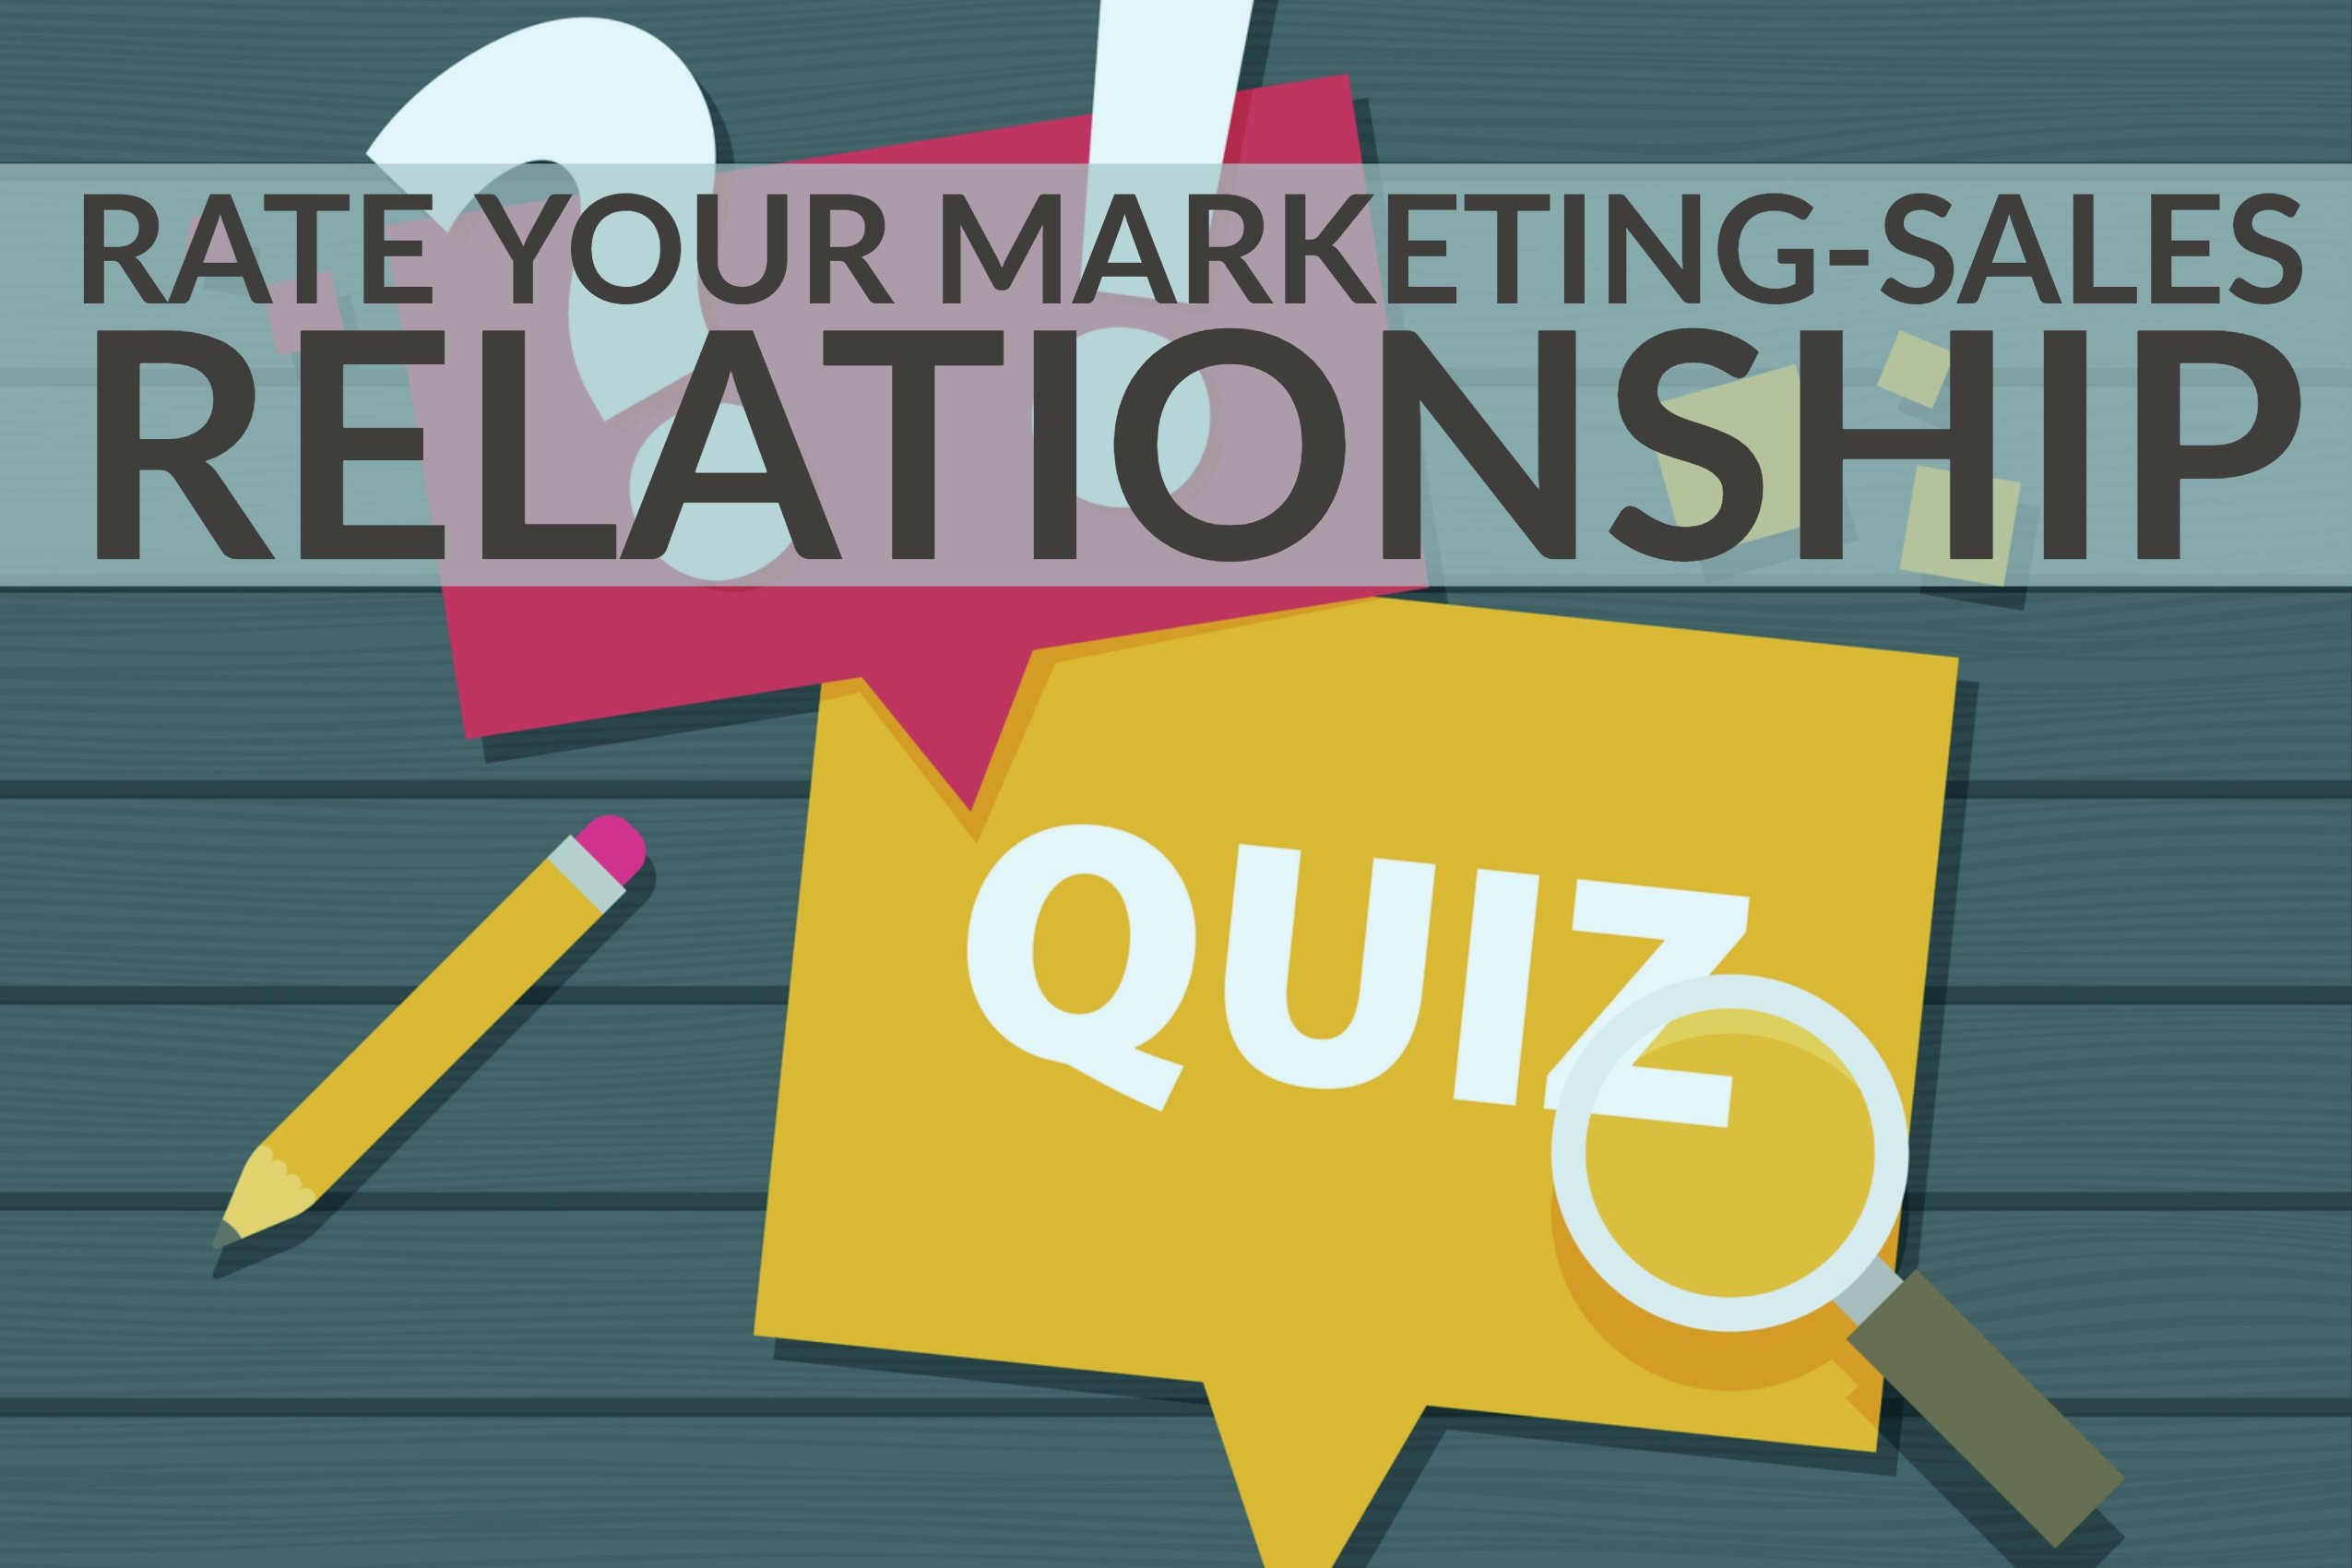 Rate Your Marketing-Sales Relationship (quiz)